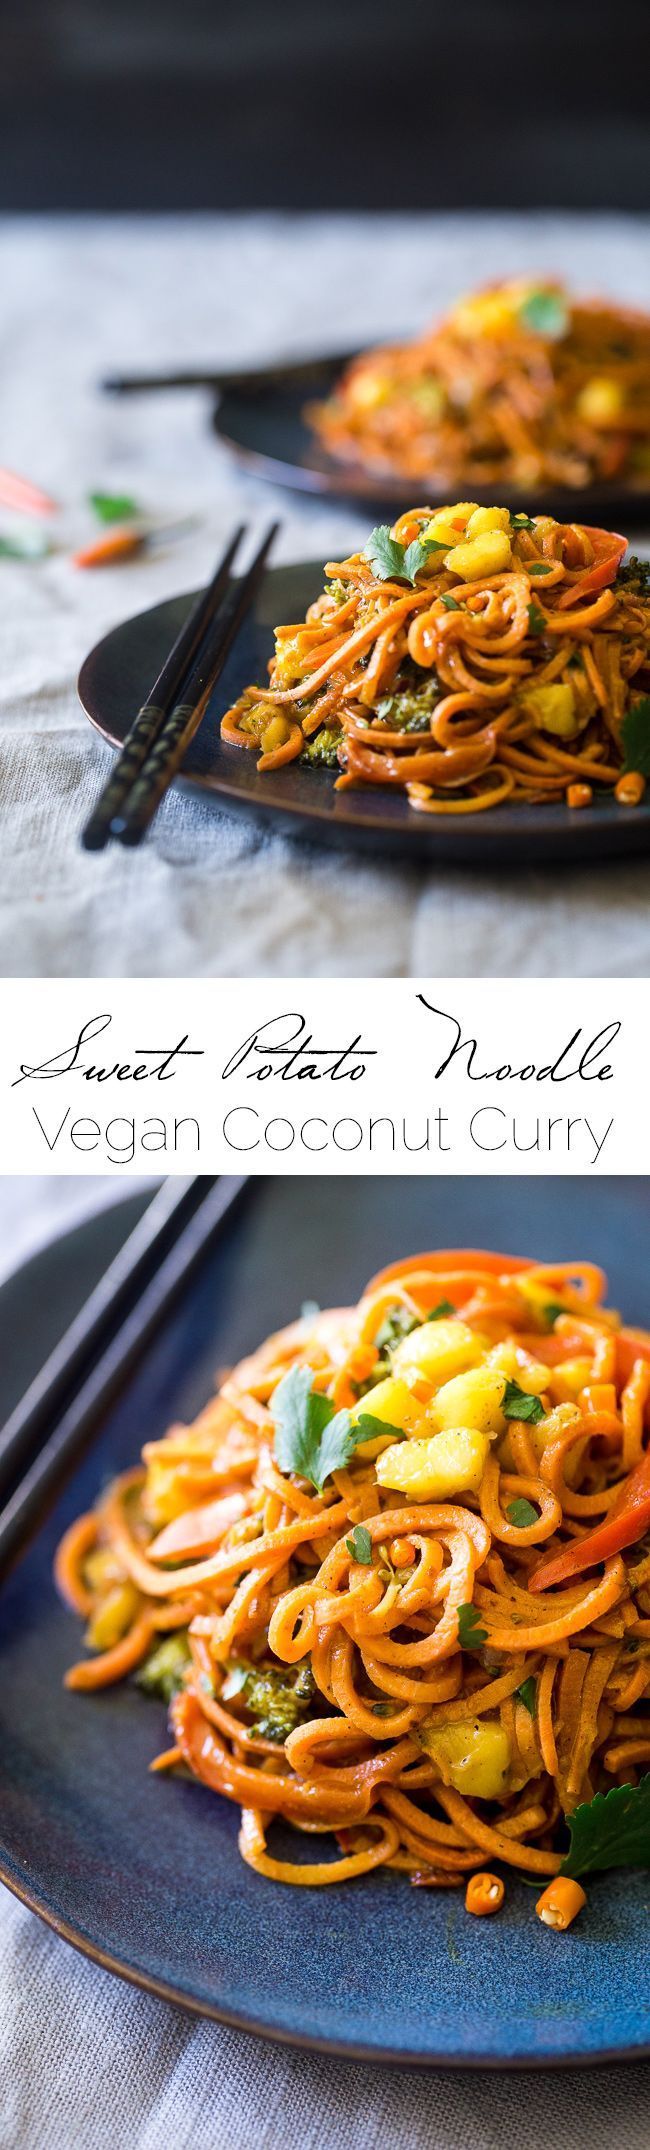 Vegan Coconut Curry with Spiralized Sweet Potato Noodles – gluten free and vegan friendly